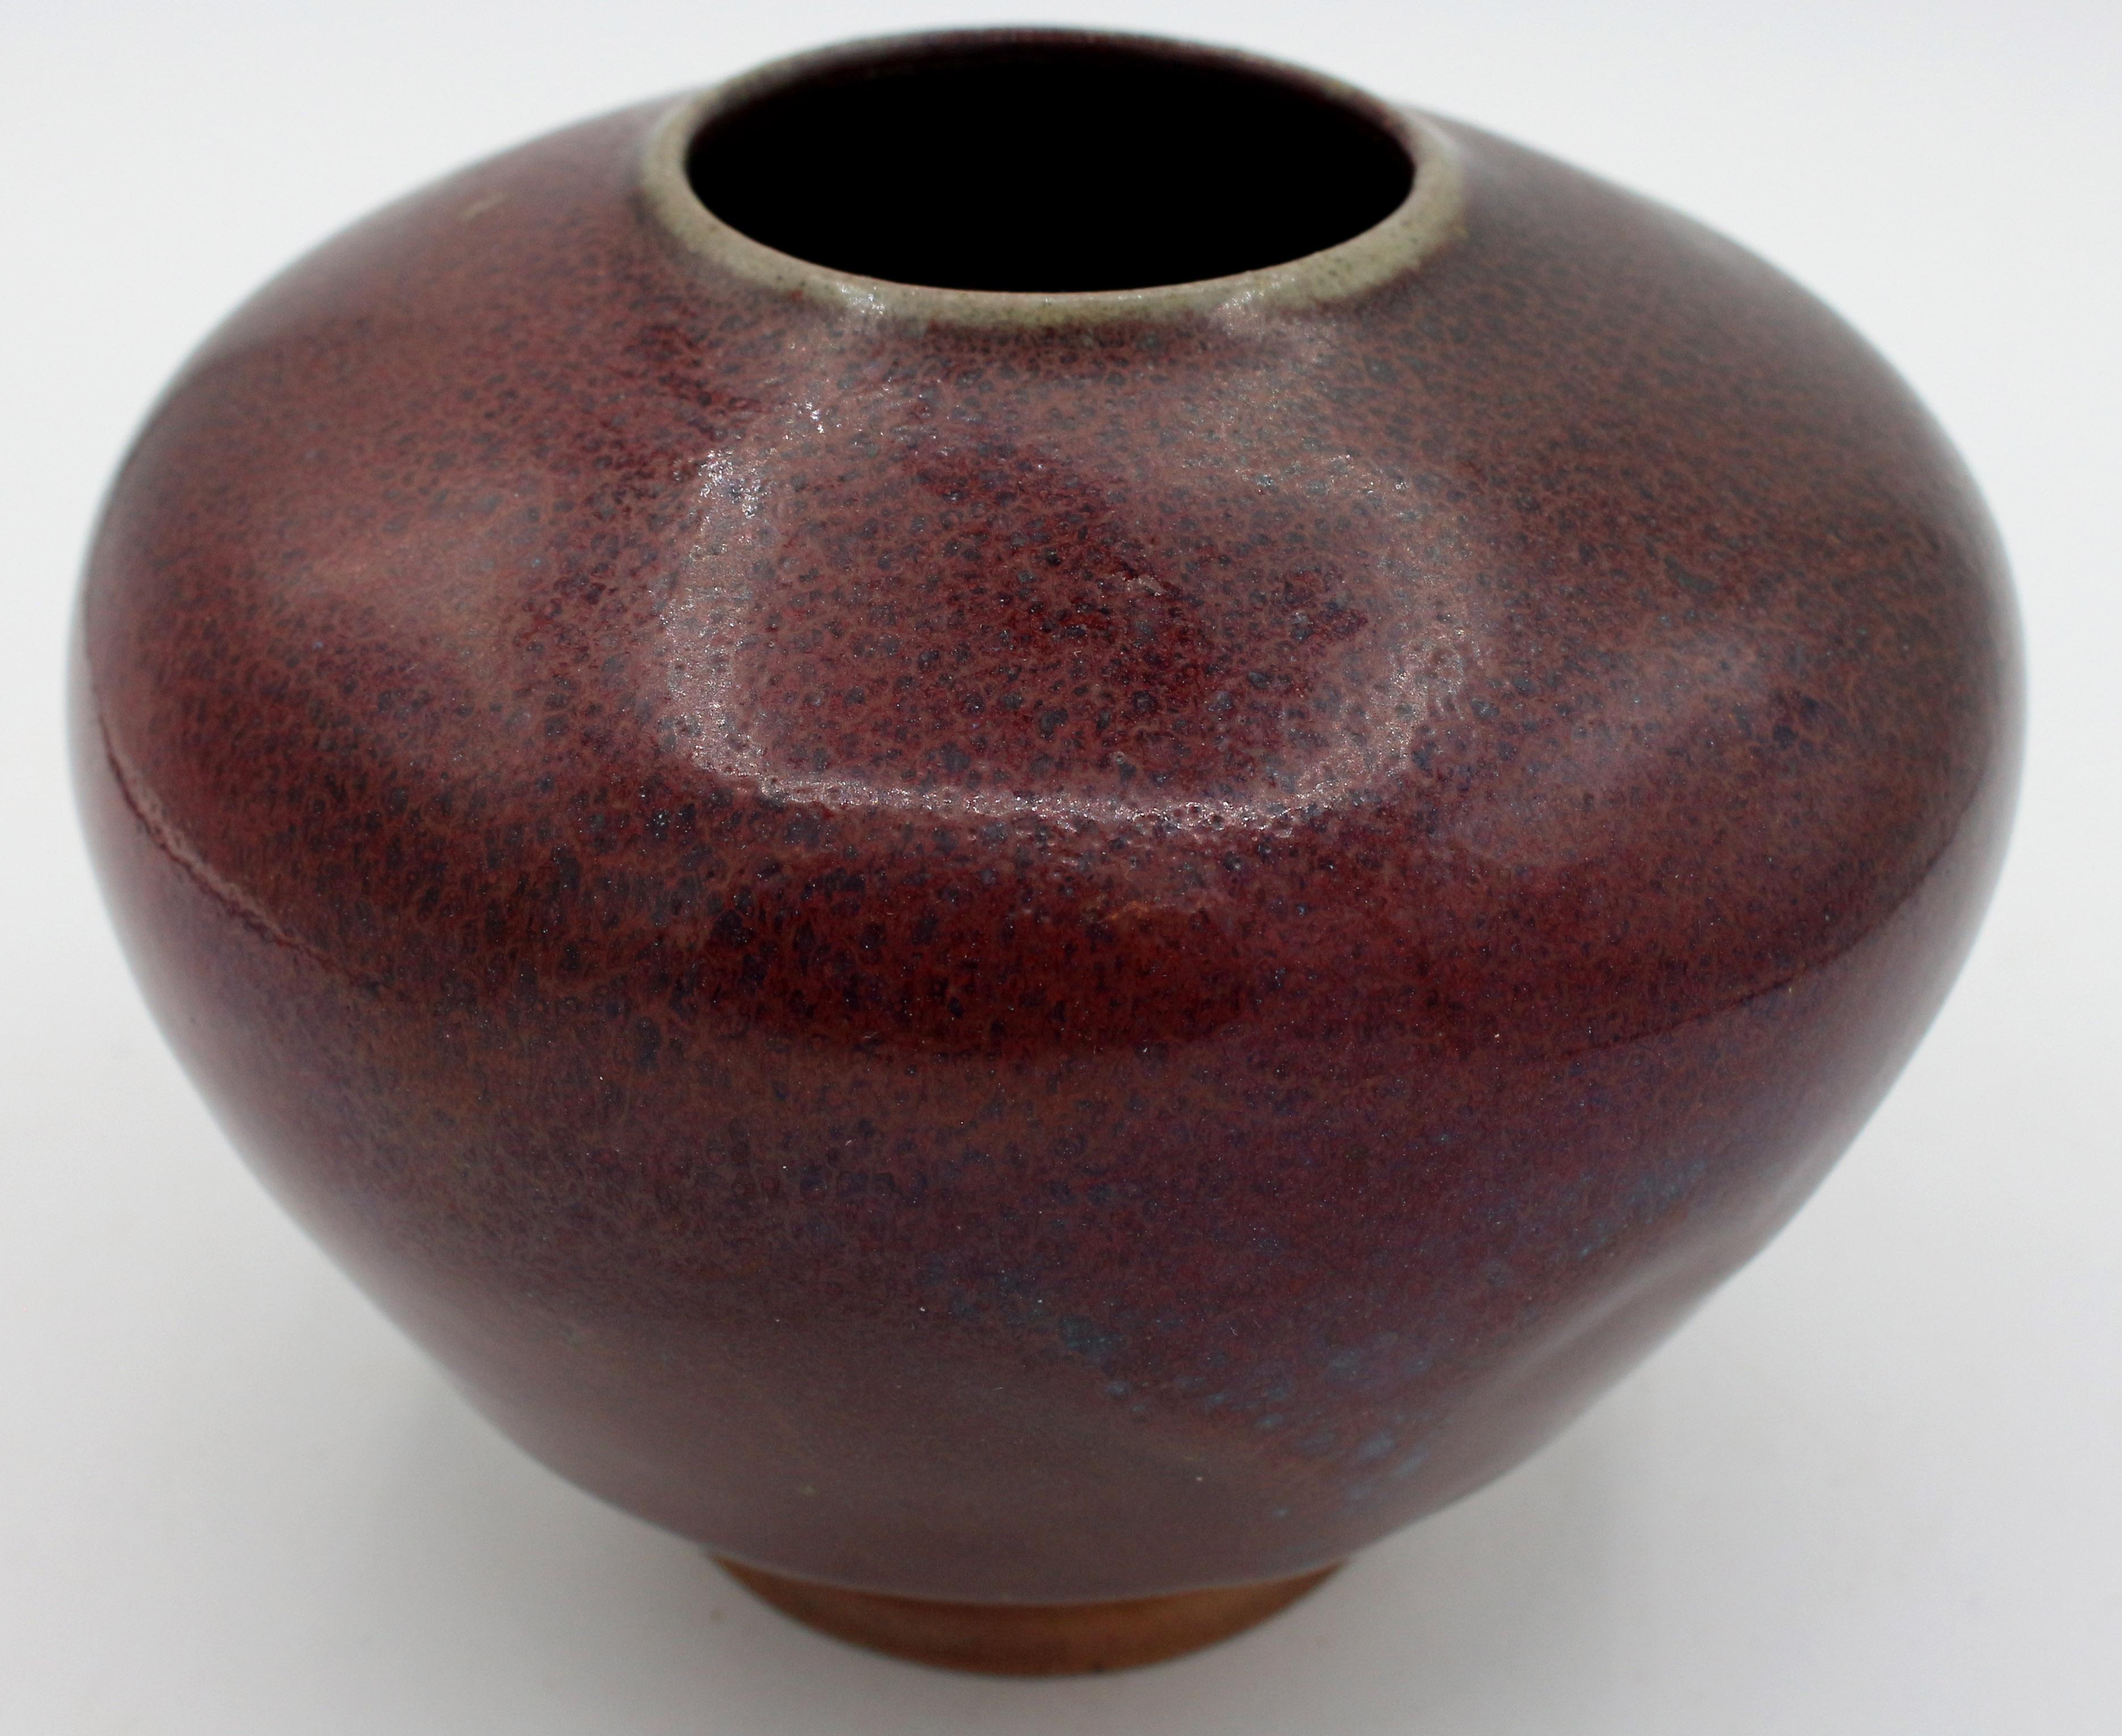 1997 Jugtown Ware pottery vase by Vernon Owens. Elegant Asiatic form with aubergene glaze. Inscribed & stamped marks.
5.5